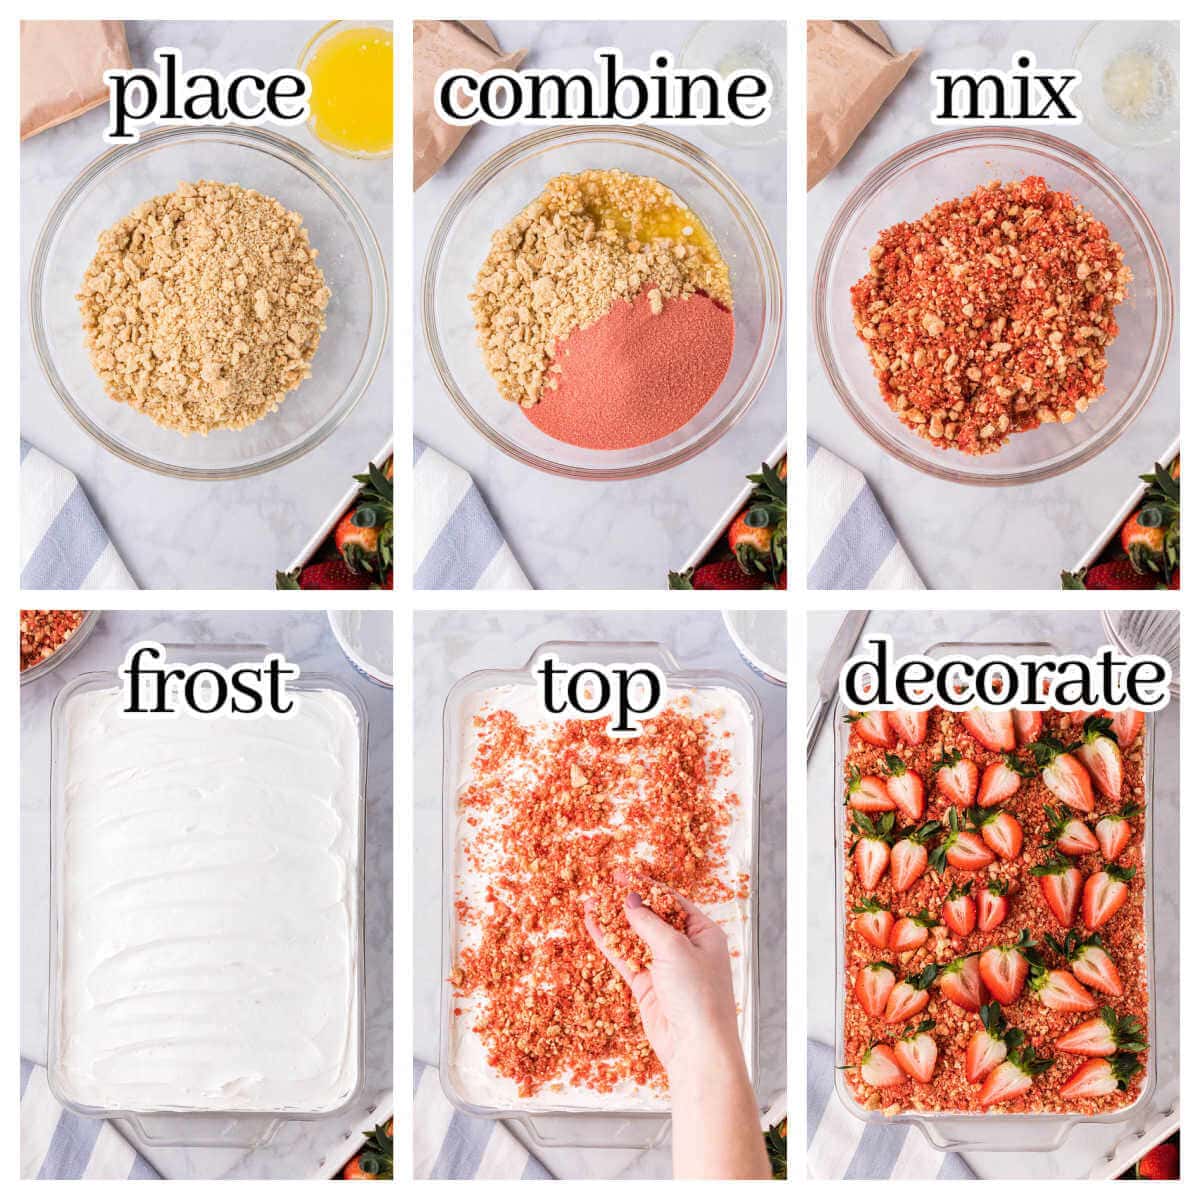 Step by step instructions showing how to frost and decorate cake recipe, with print overlay.